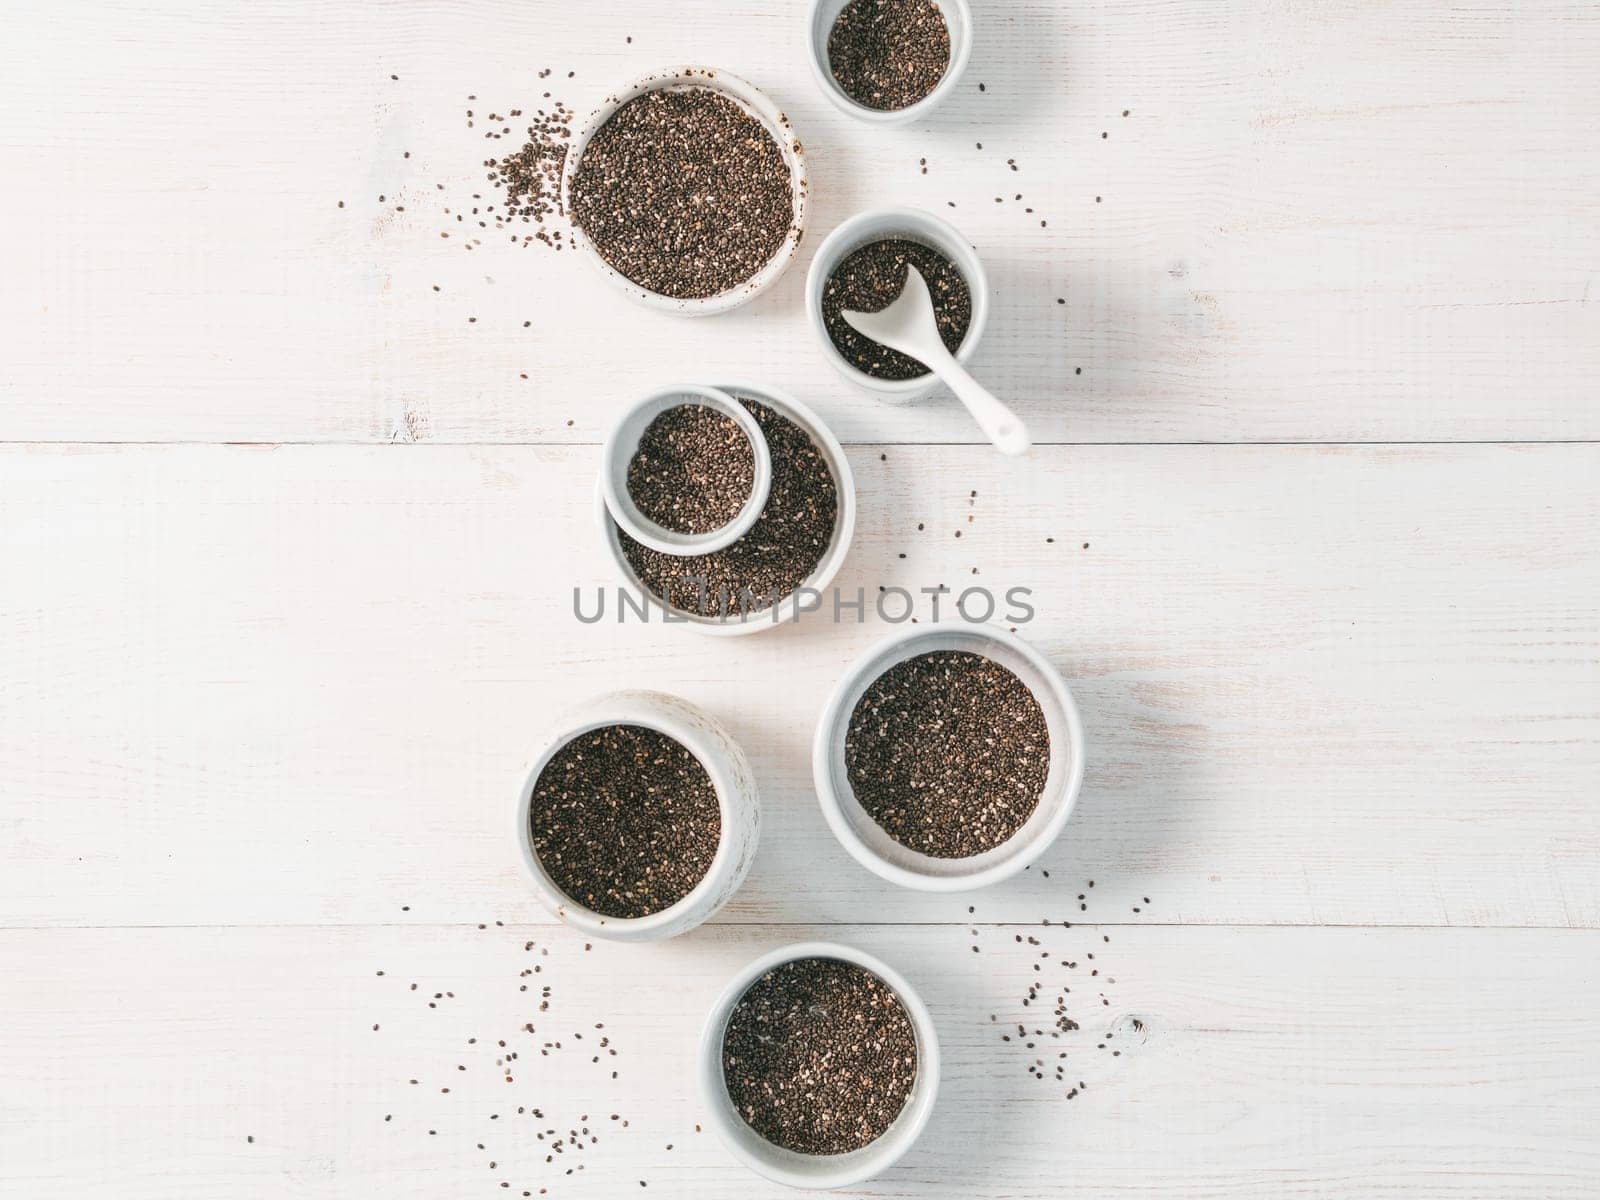 Organic chia seeds on white wooden table. Set of small bowls with organic chia seed. Superfood concept. Copy space. Top view or flat-lay.